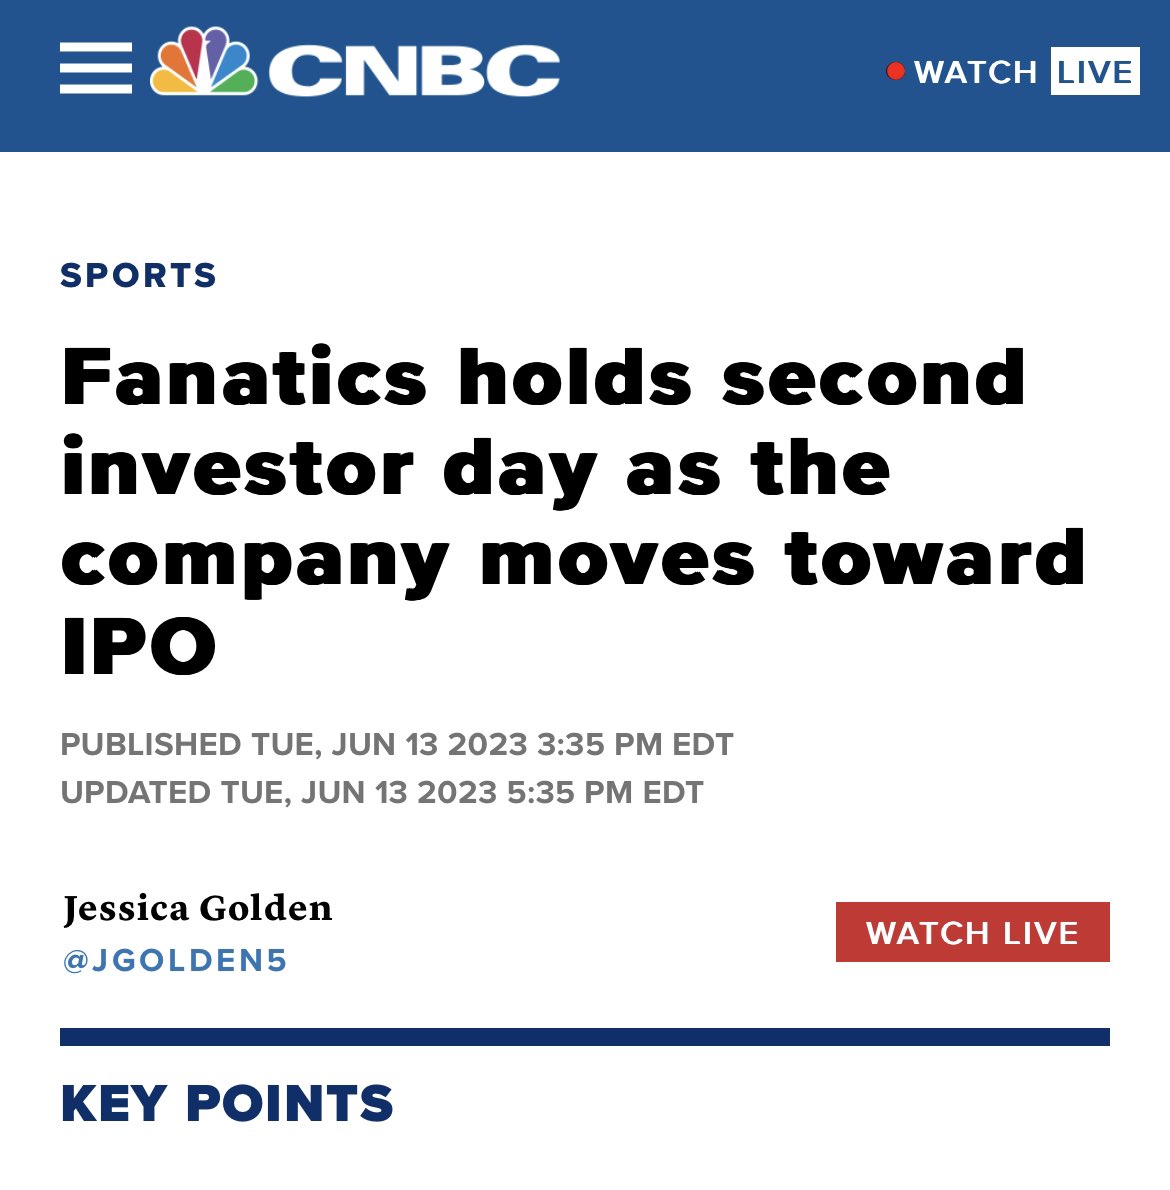 Fanatics holds second investor day as the company moves toward IPO